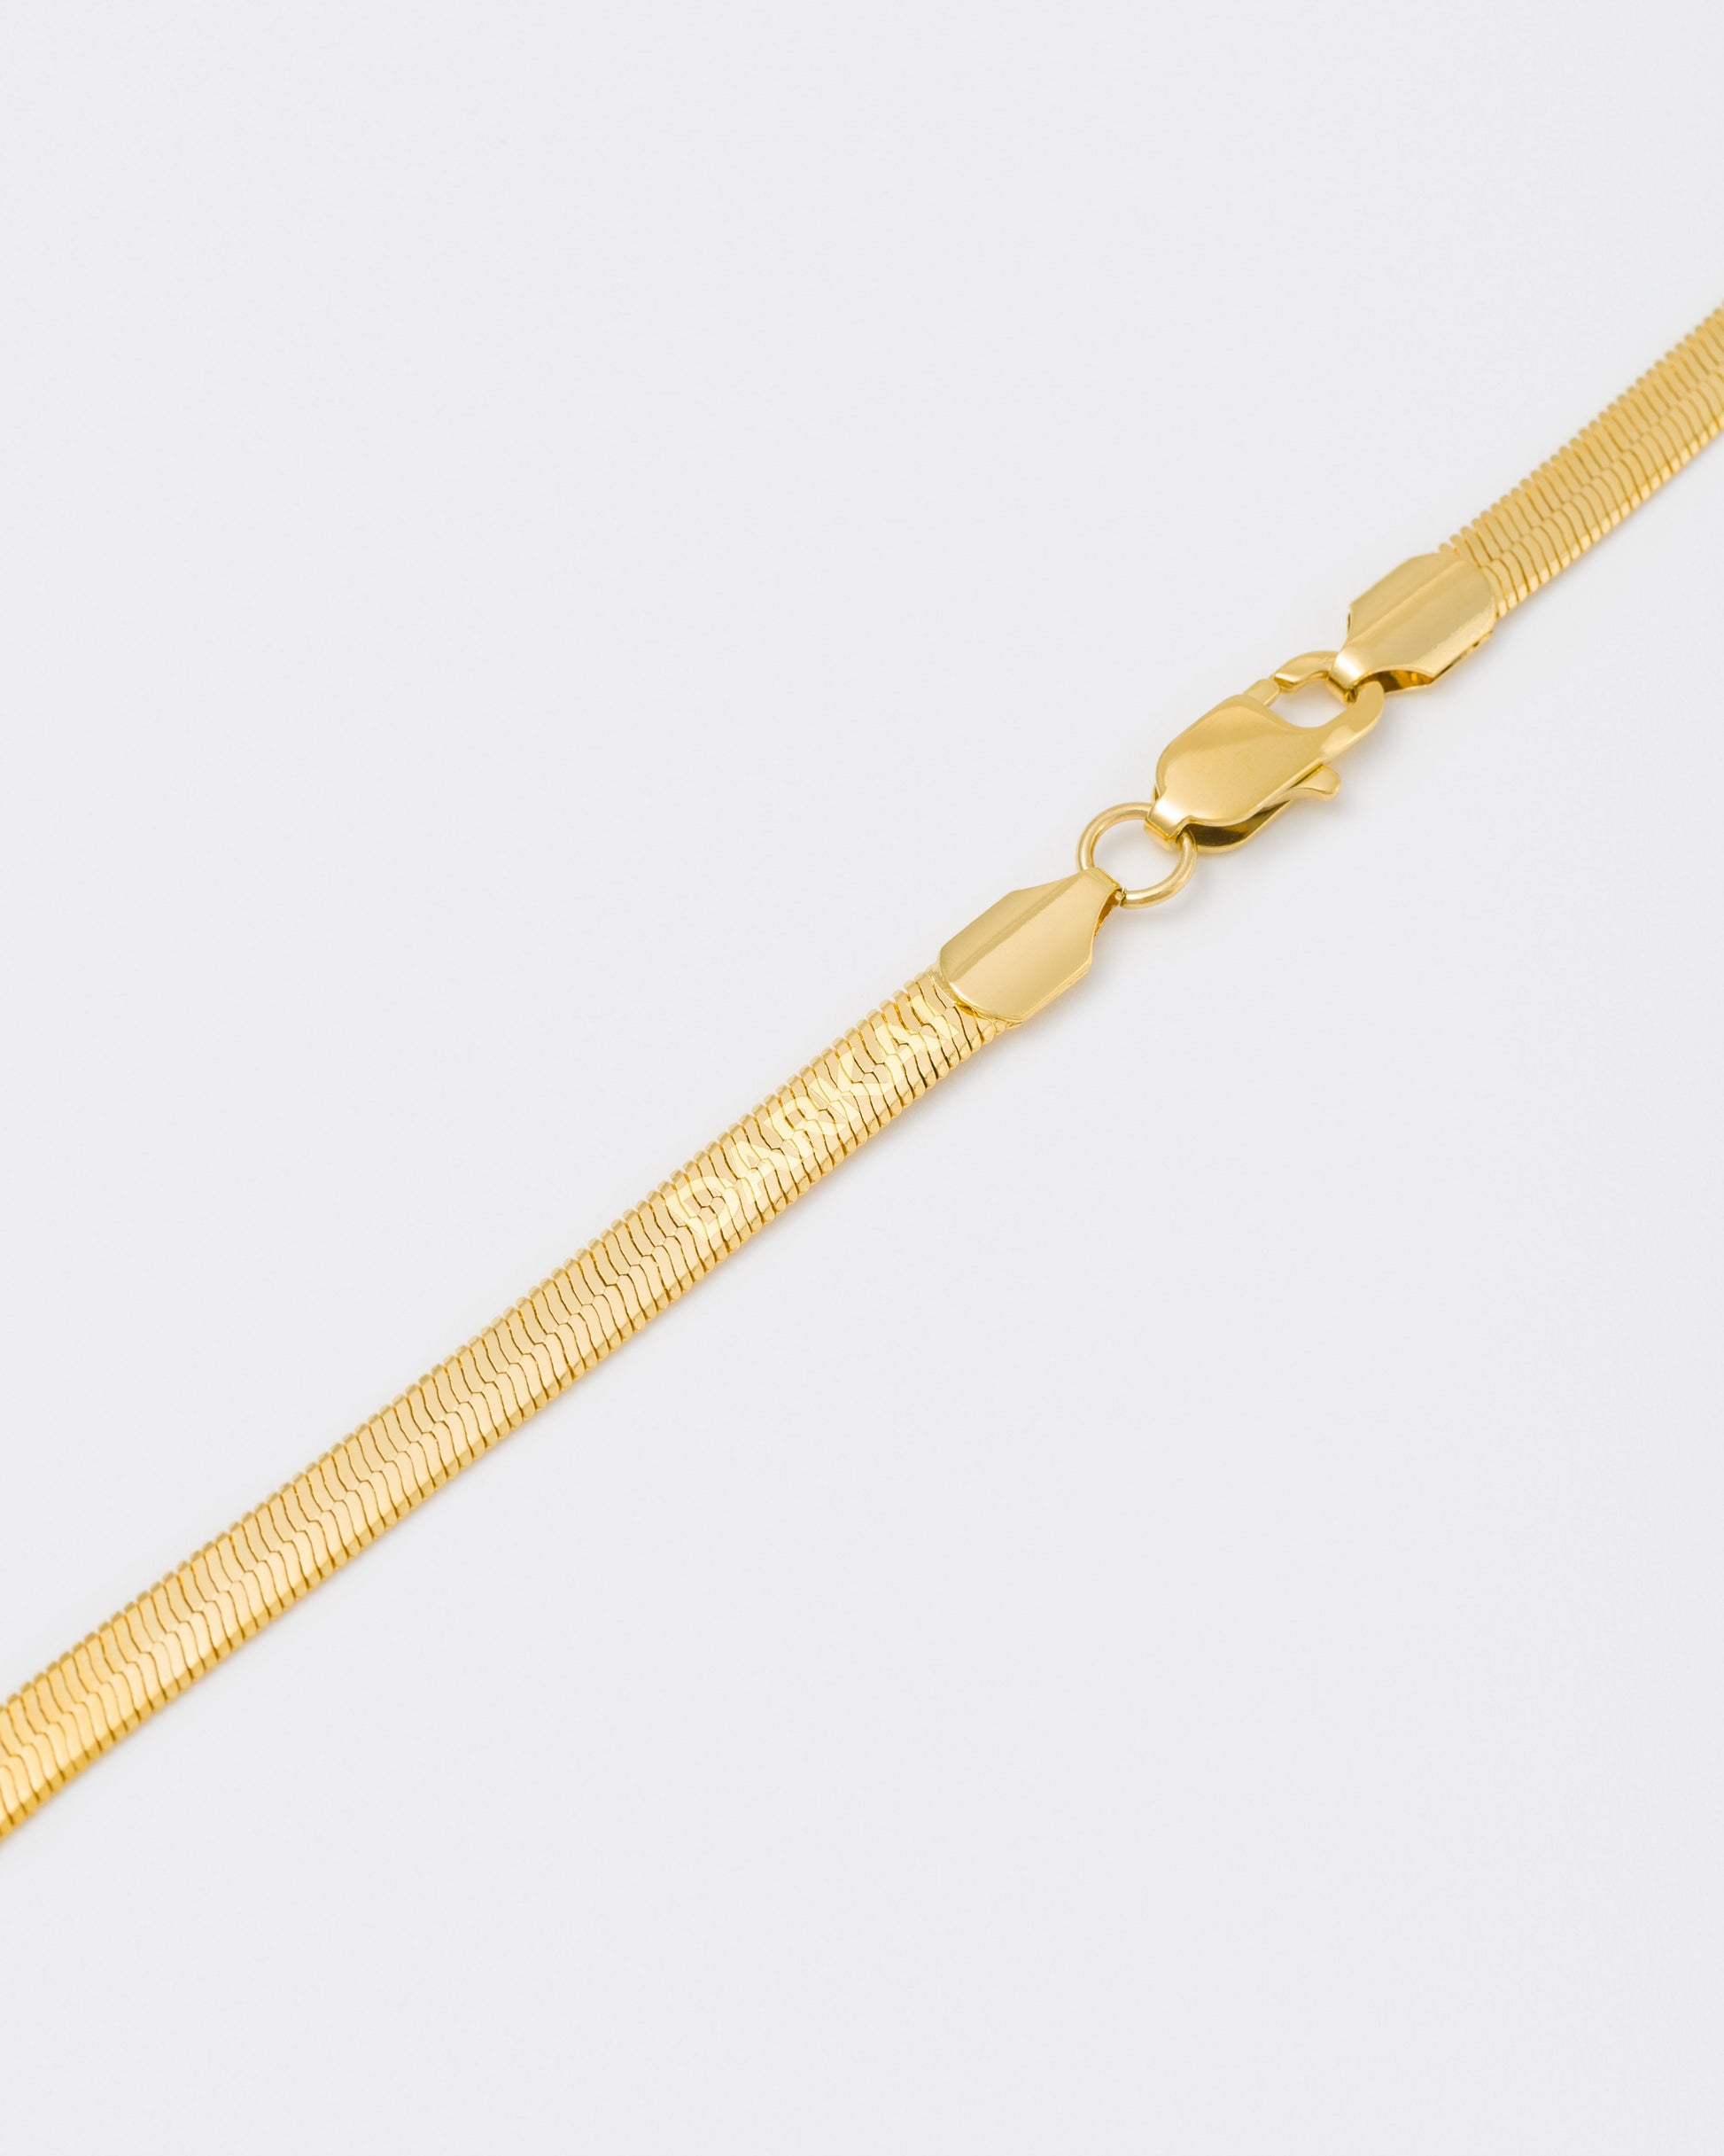 detail of 18k yellow gold coated herringbone chain necklace with lasered logo along the links and regular lobster clasp.